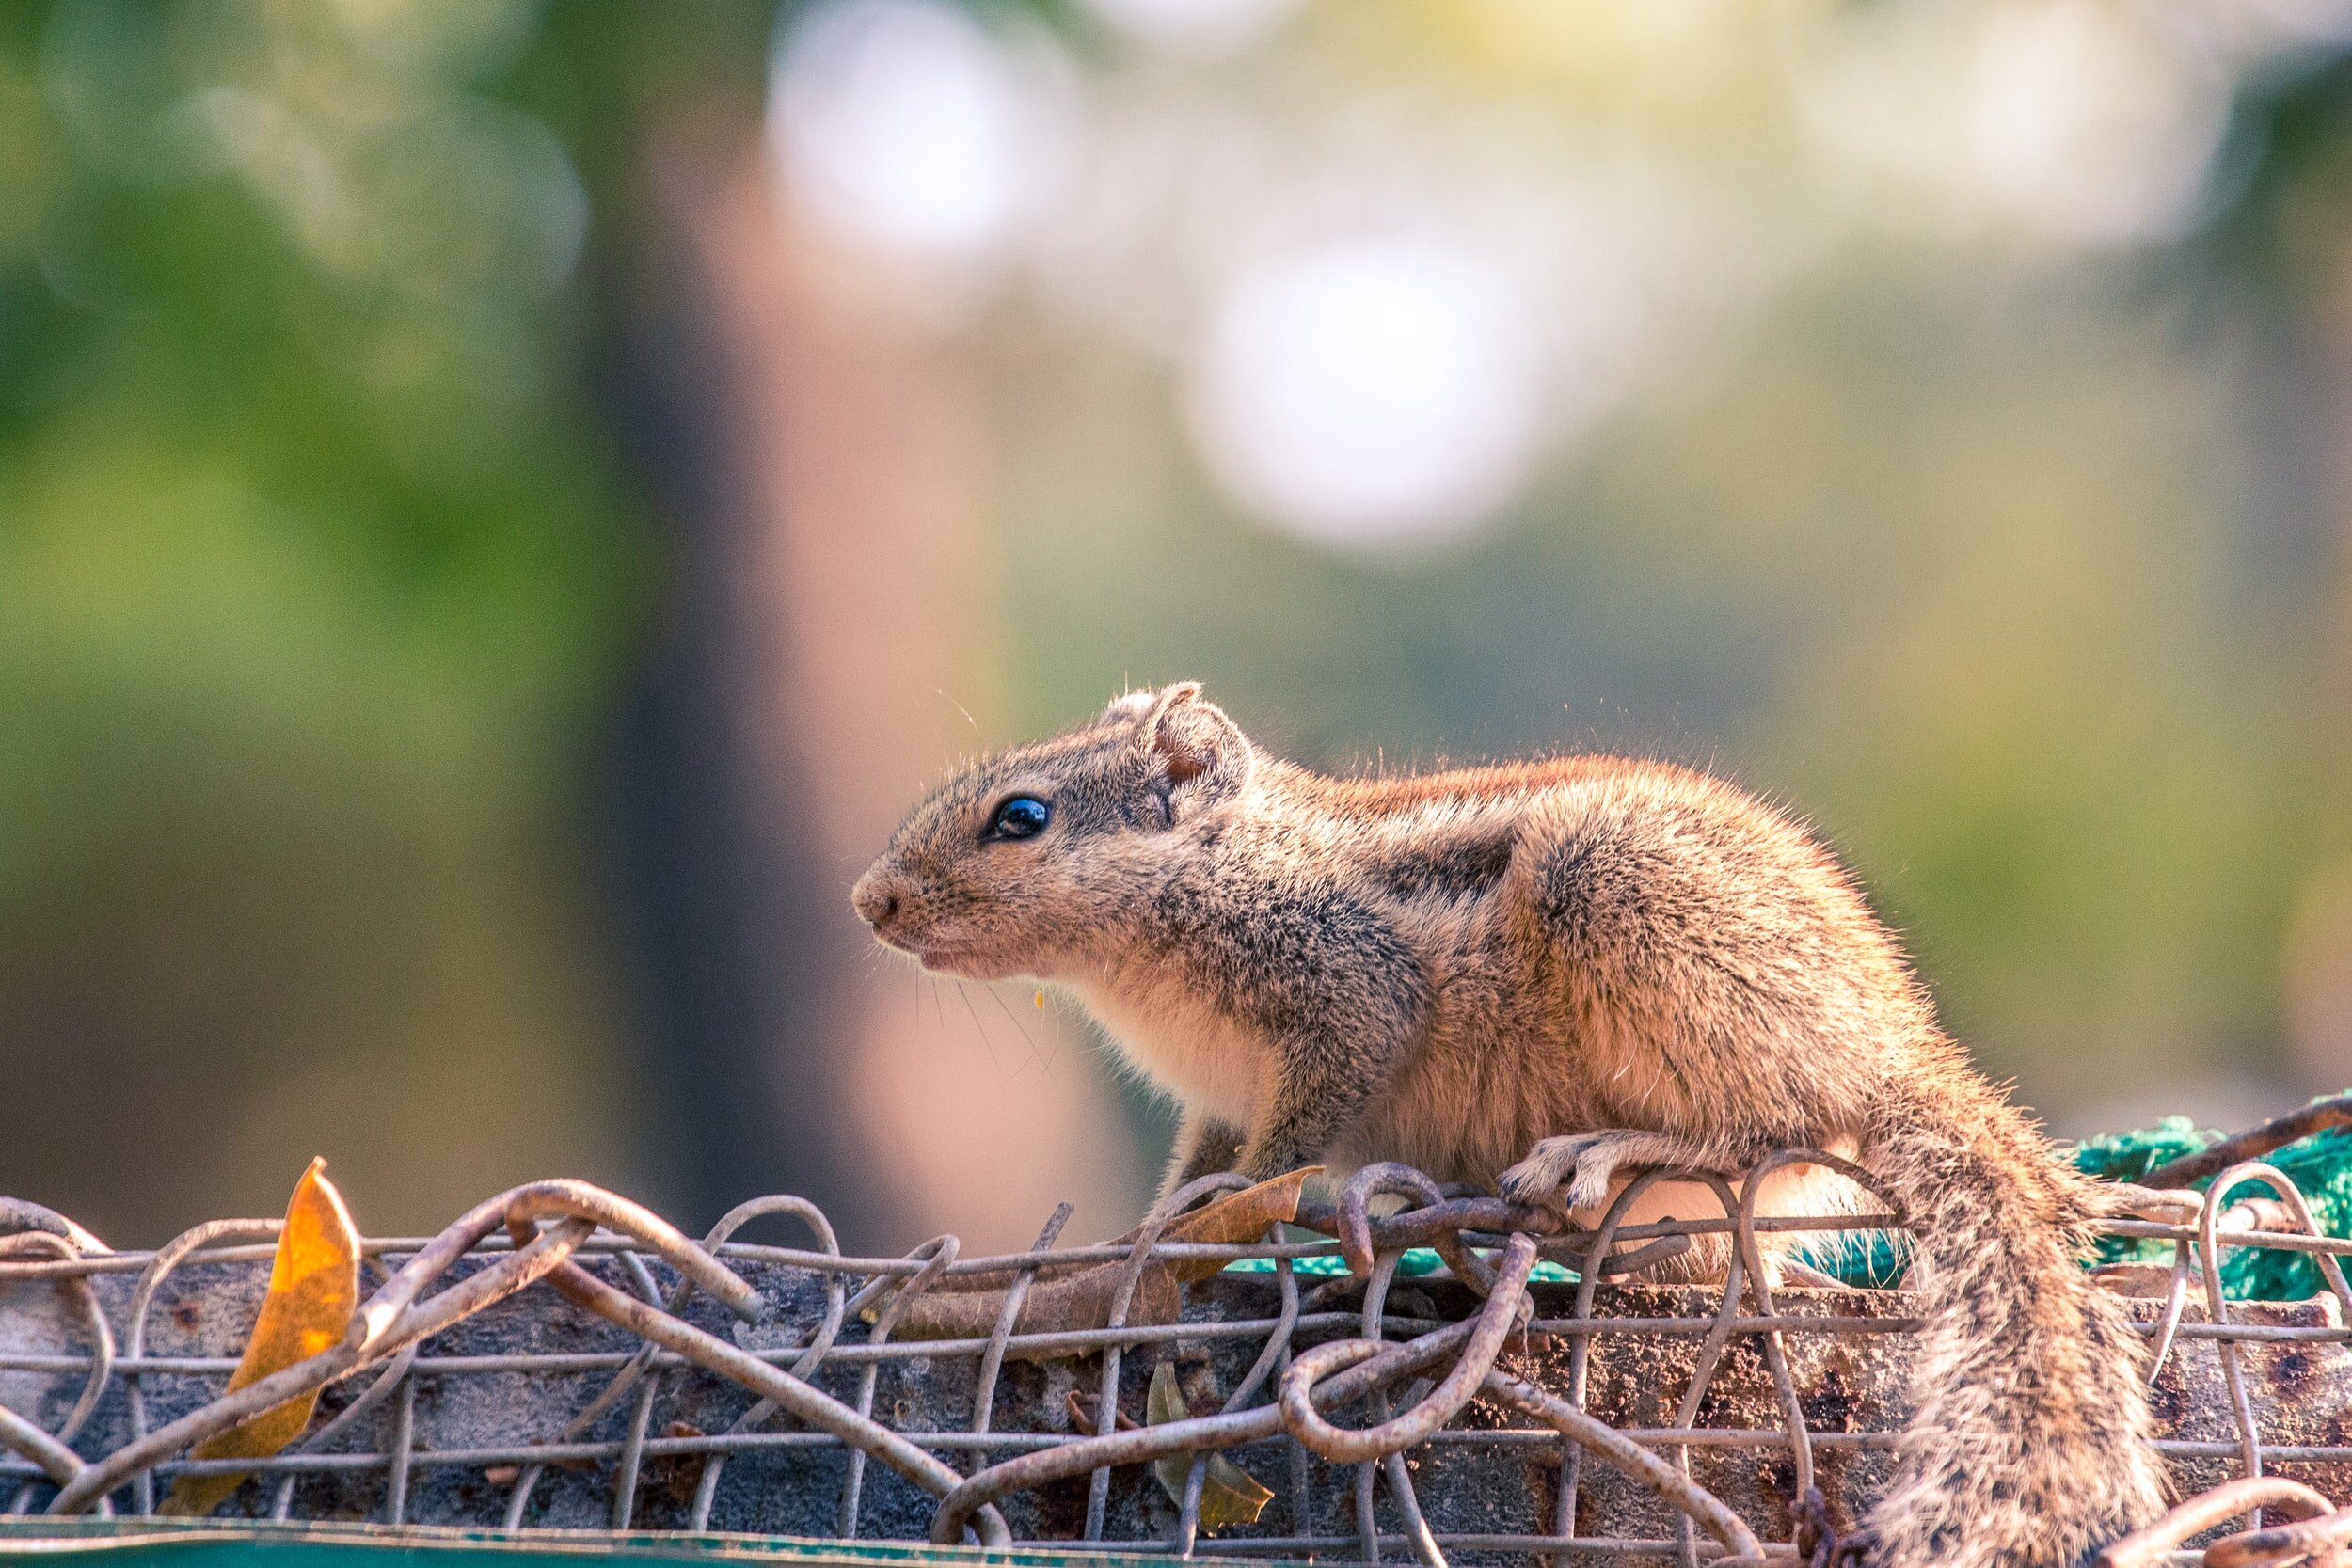 How to get rid of Squirrels in your attic the RIGHT way. 